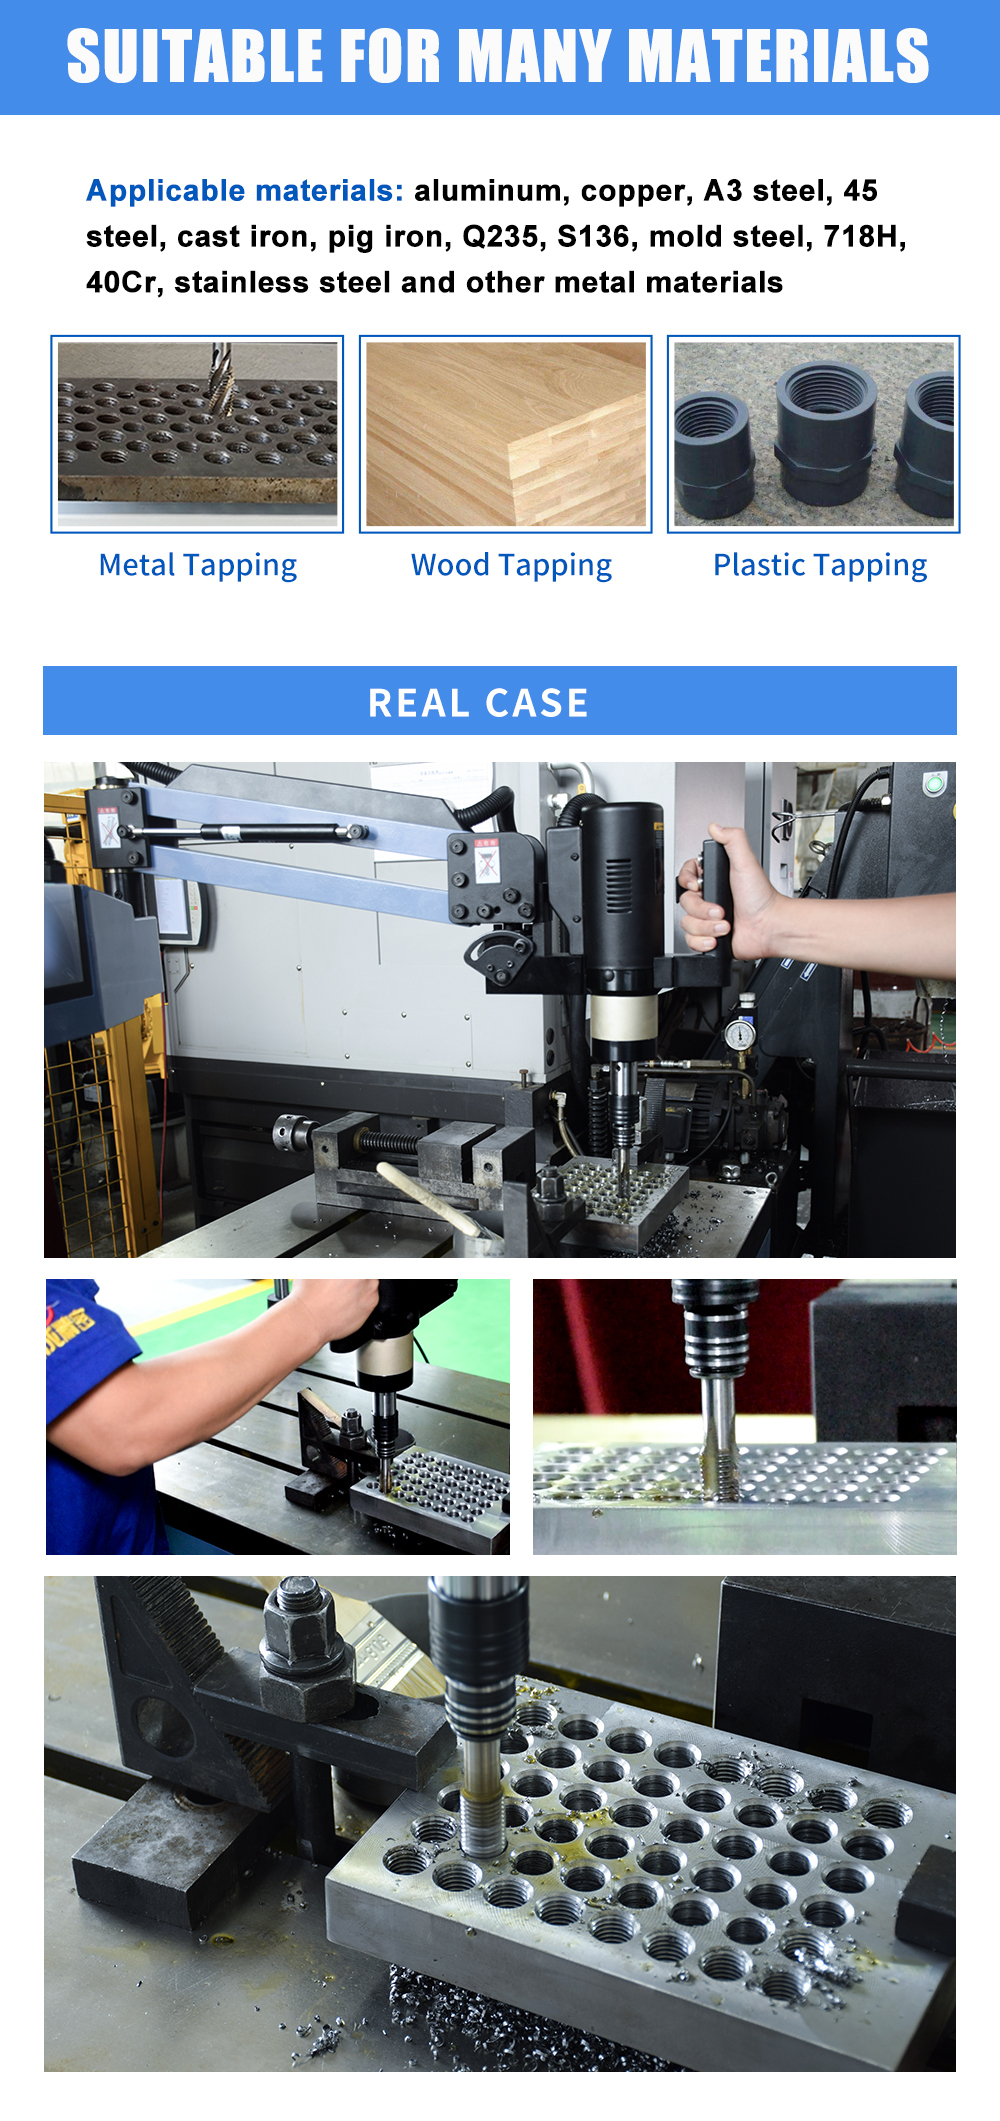 Automatic Tapping M3-M16 Electric Tapping Machine Manual Tapping Deep Holes Tapping Device  Automatic Tapping M3-M16 Electric Tapping Machine Manual Tapping Deep Holes Tapping Device